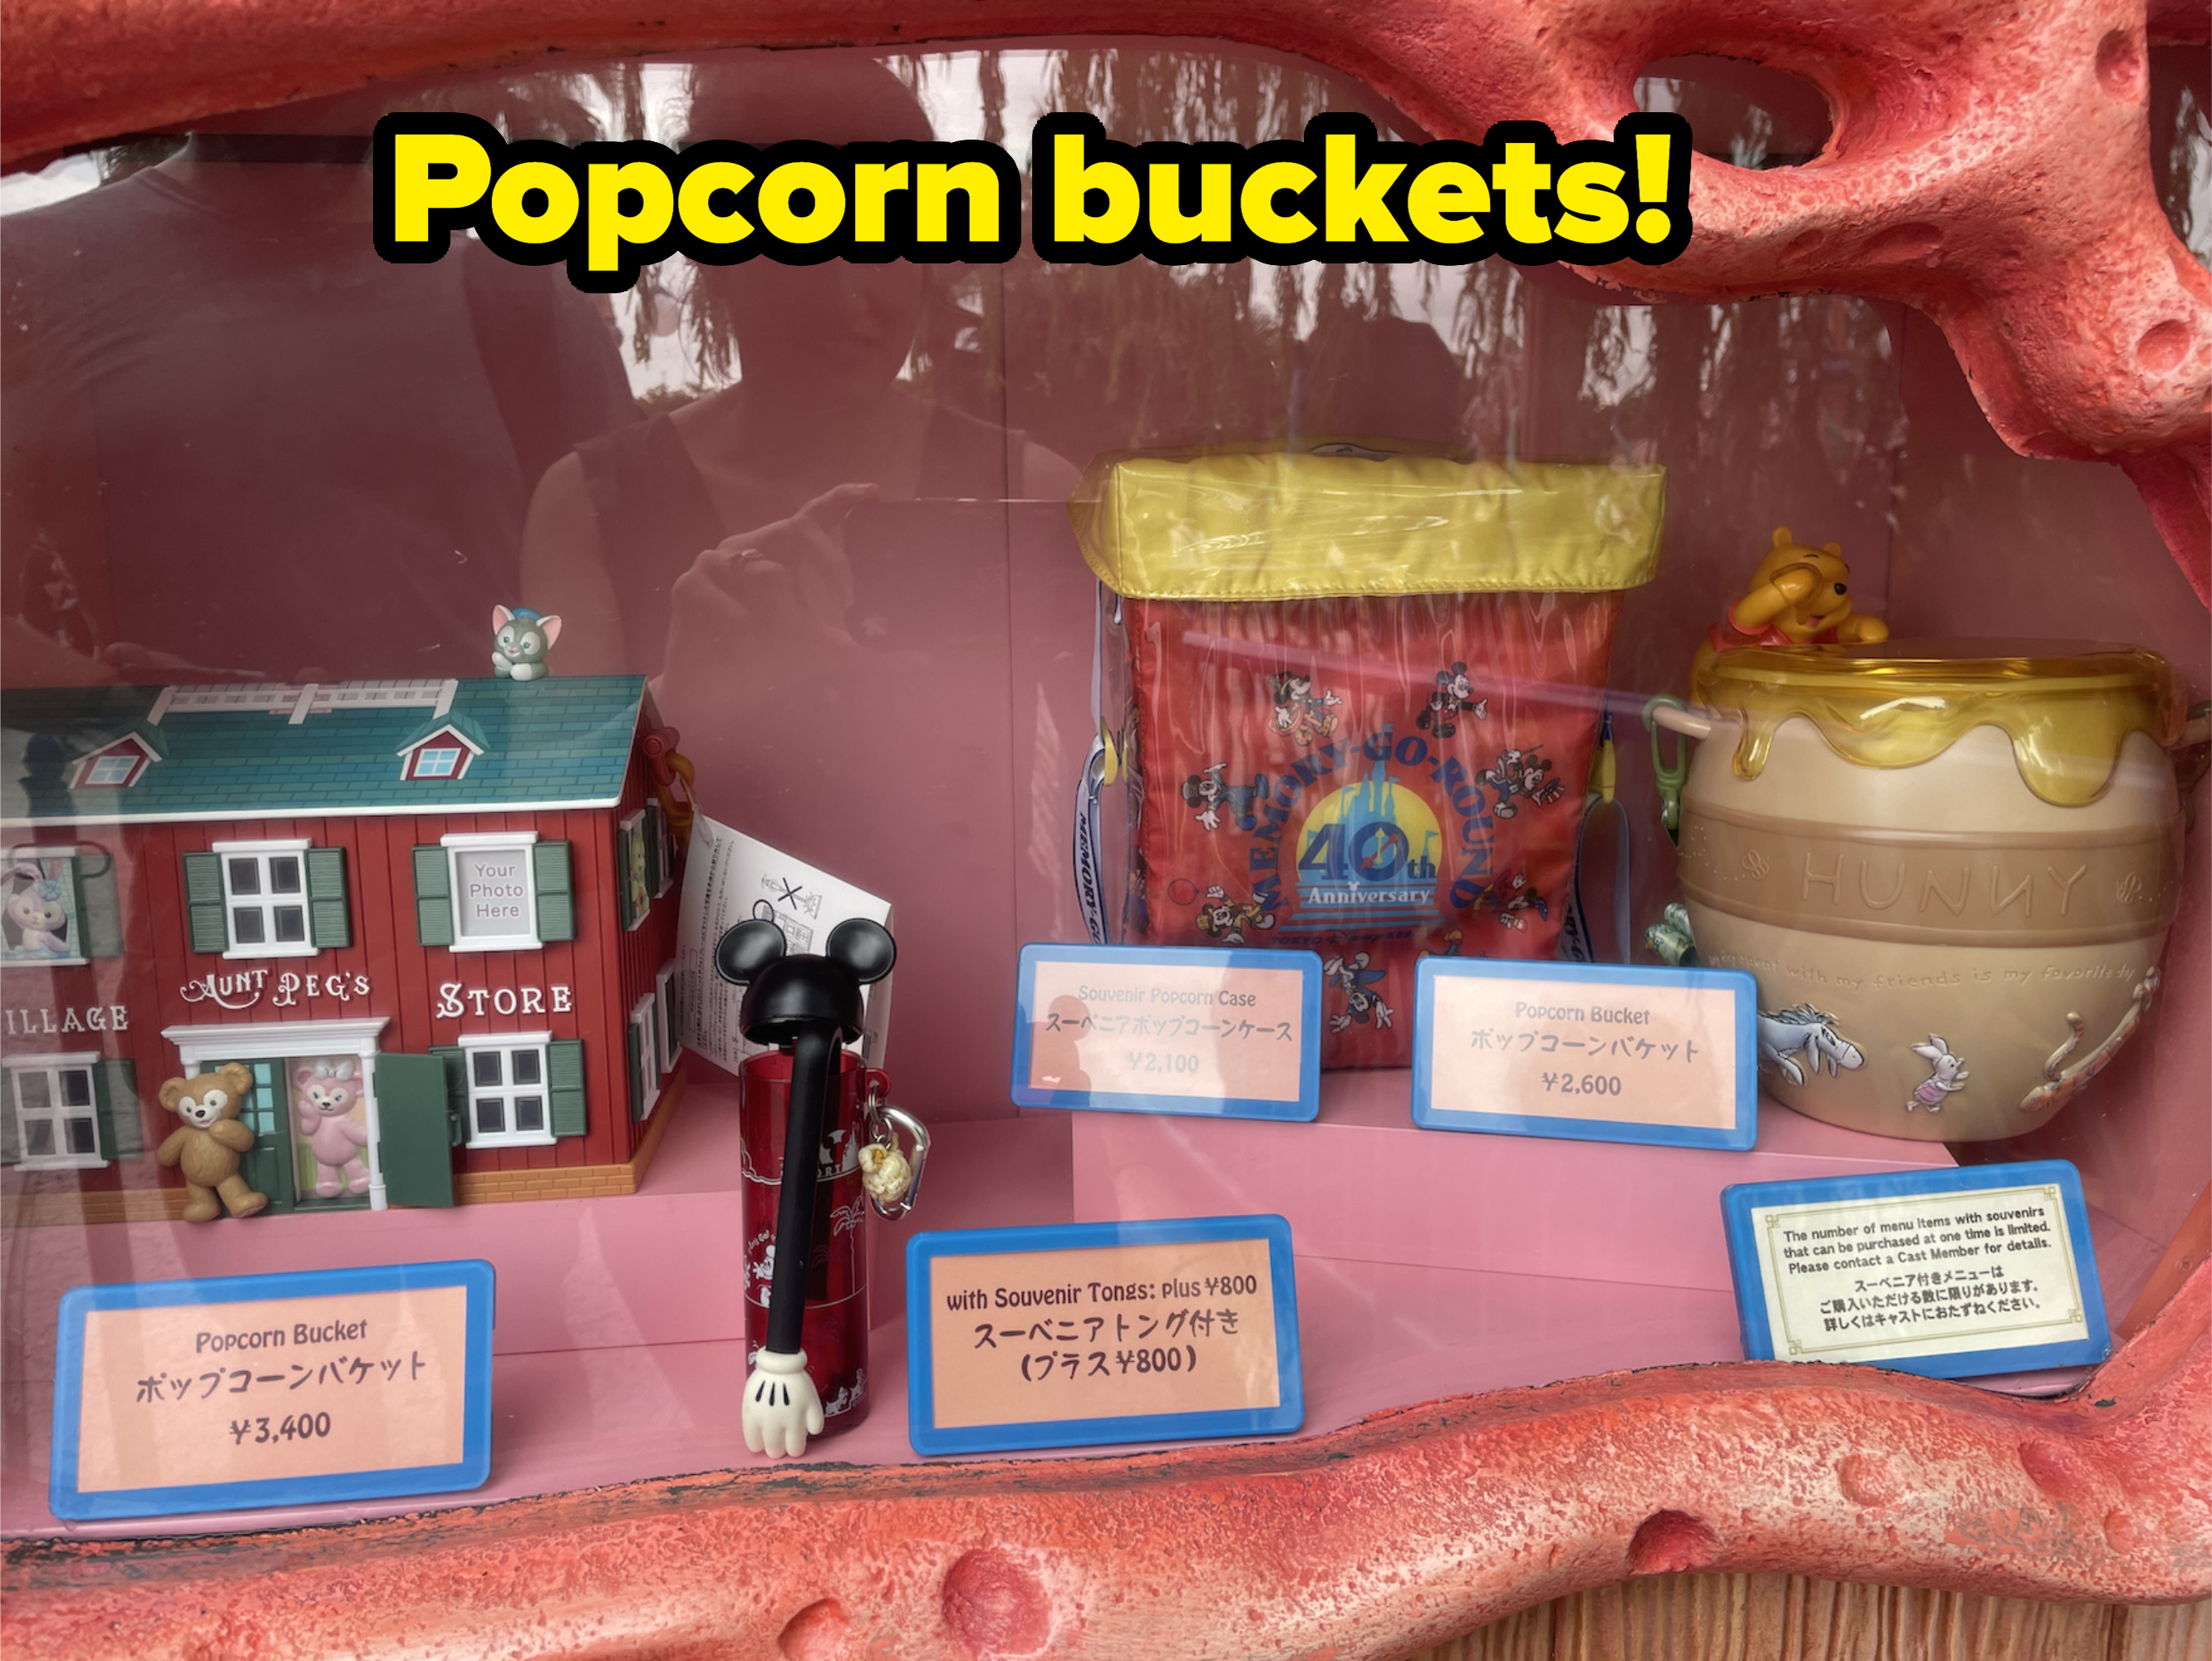 Display window showcasing Disney-themed popcorn buckets and souvenir items, including a Mickey-themed pen, a toy store, and a honey pot